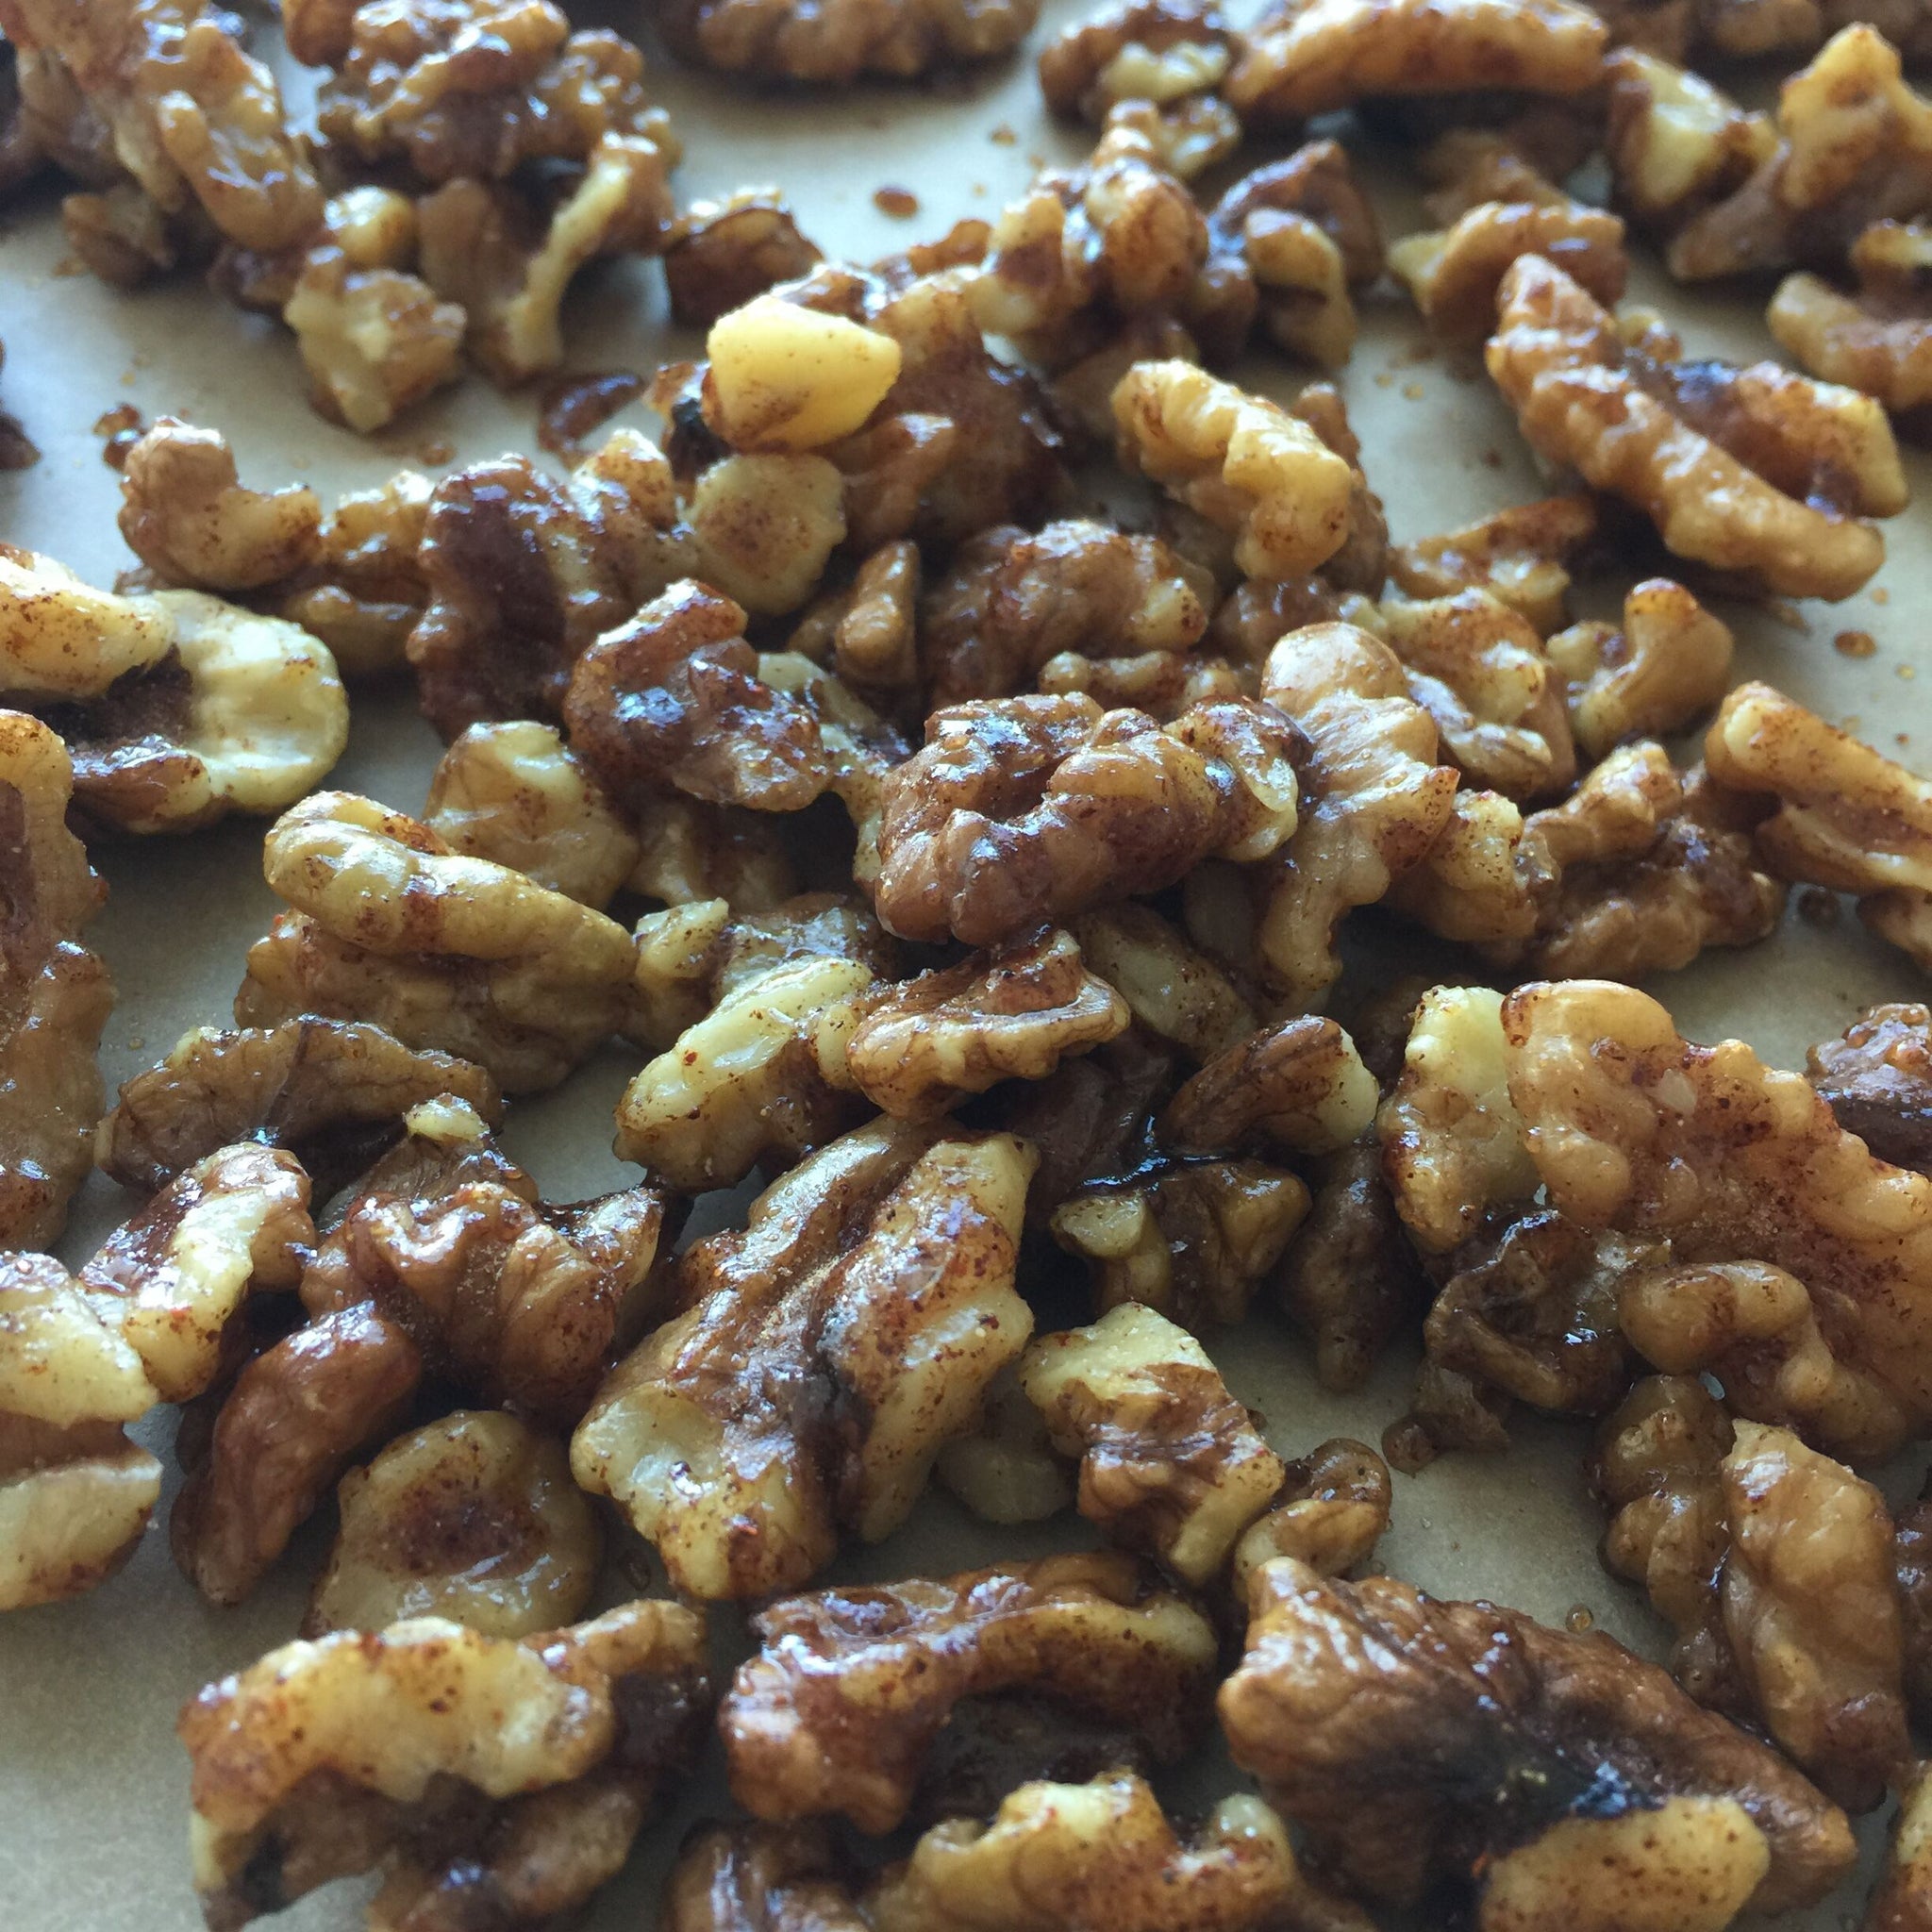 Candied Walnuts With a Kick!